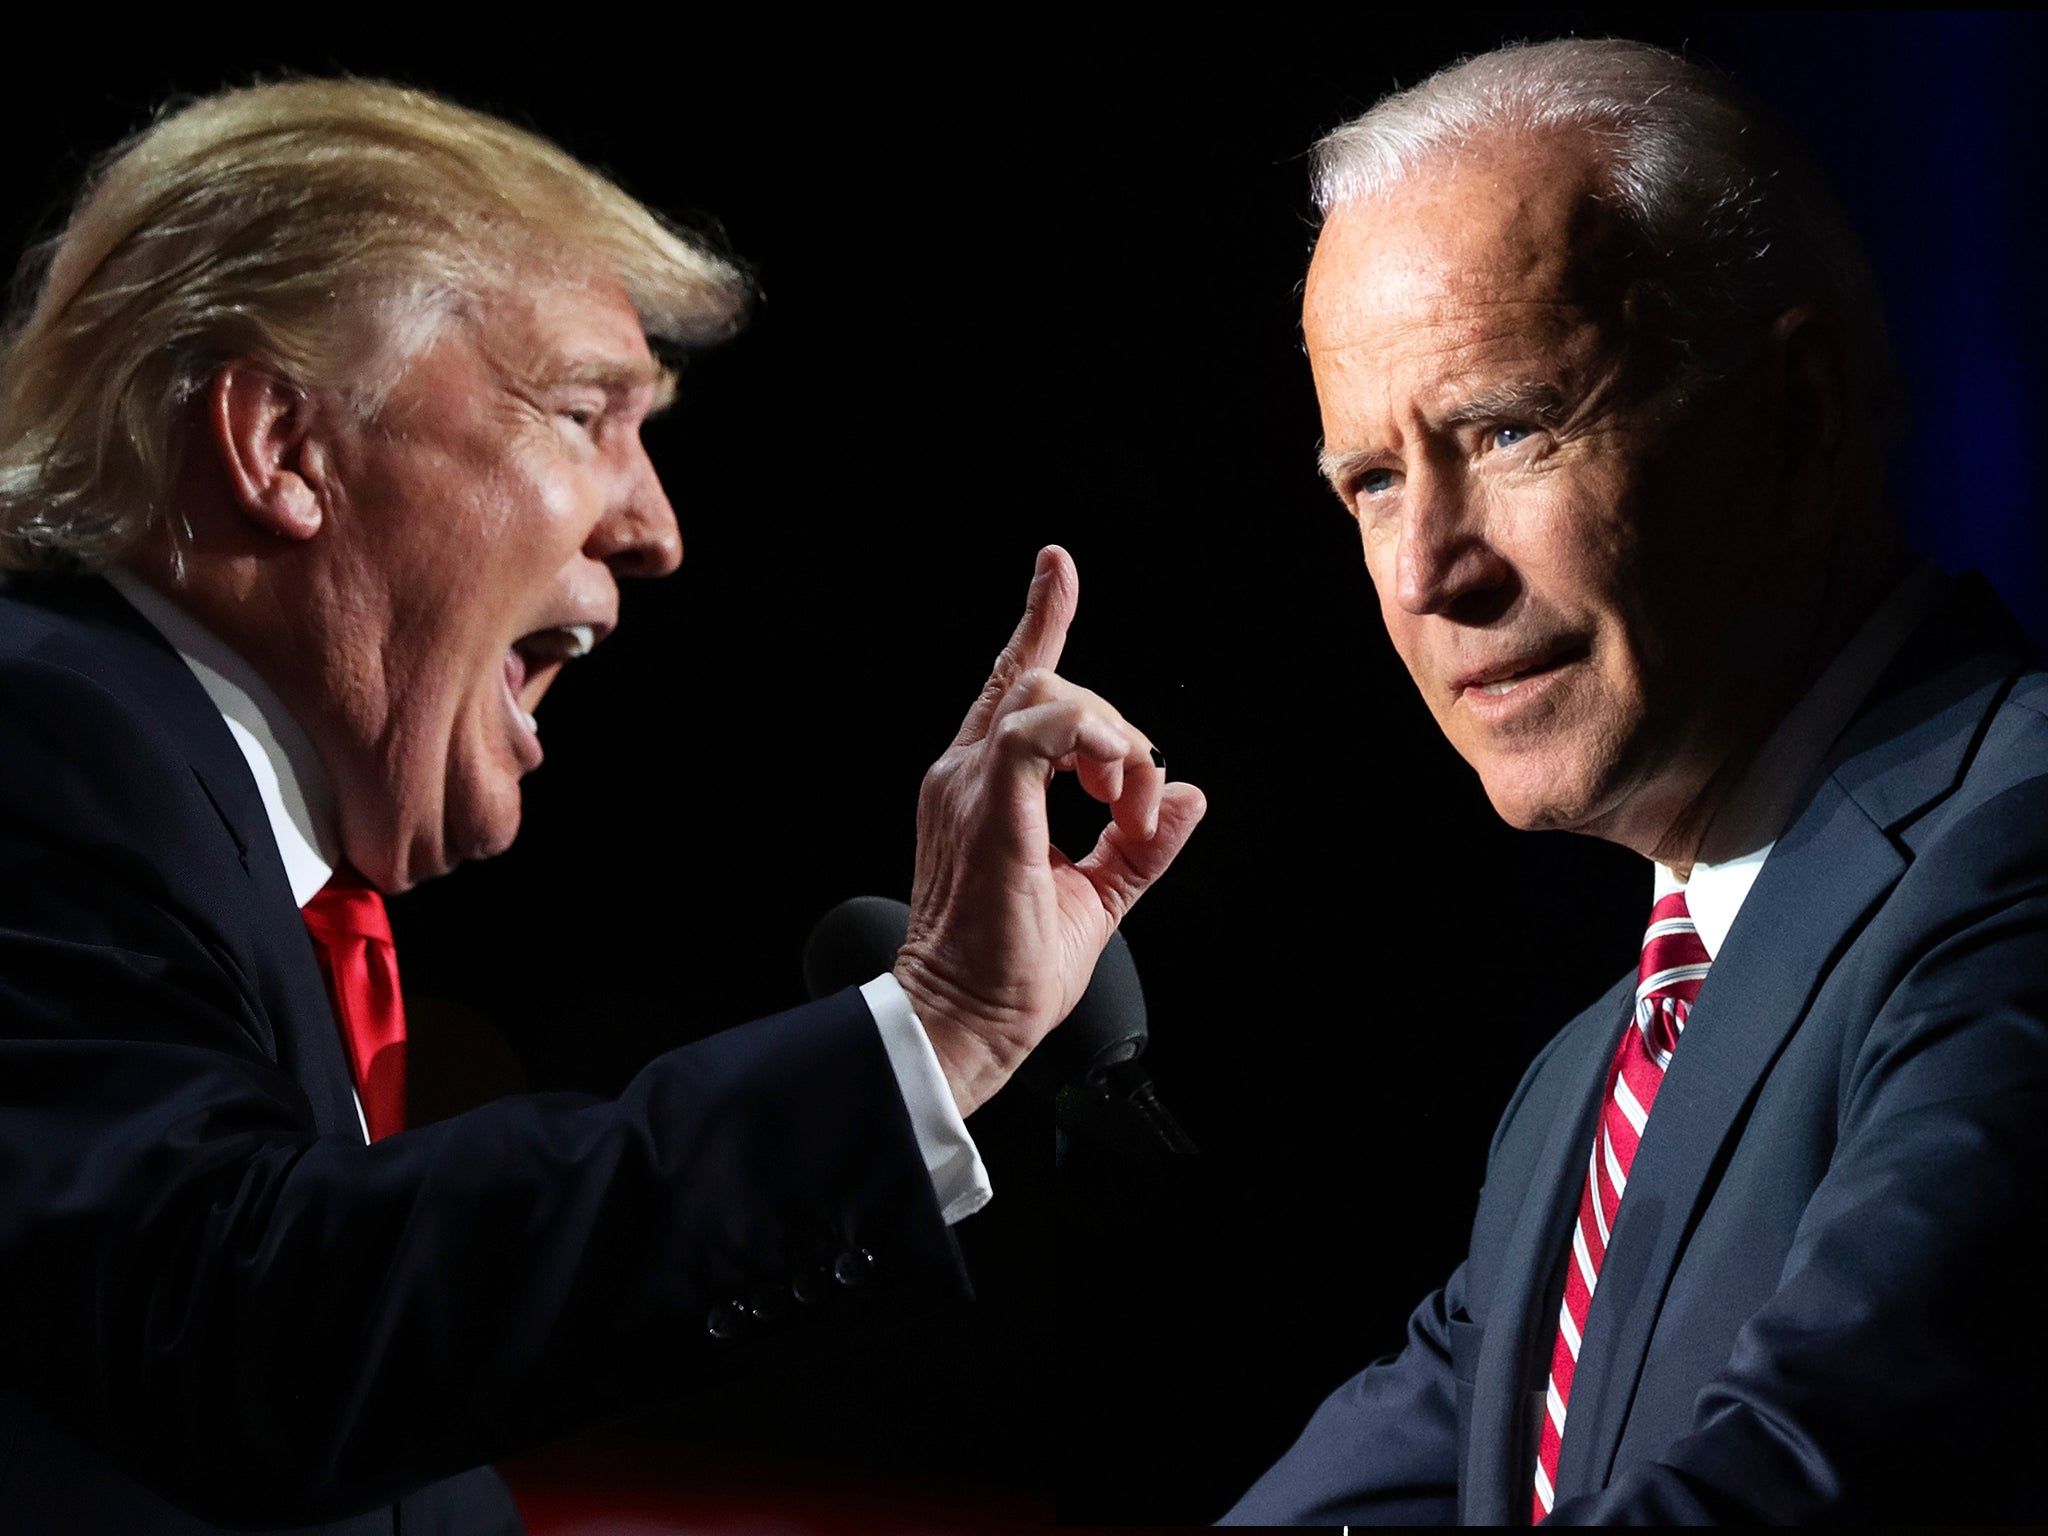 Trump says he will 'go on and do other things' if he loses to Biden